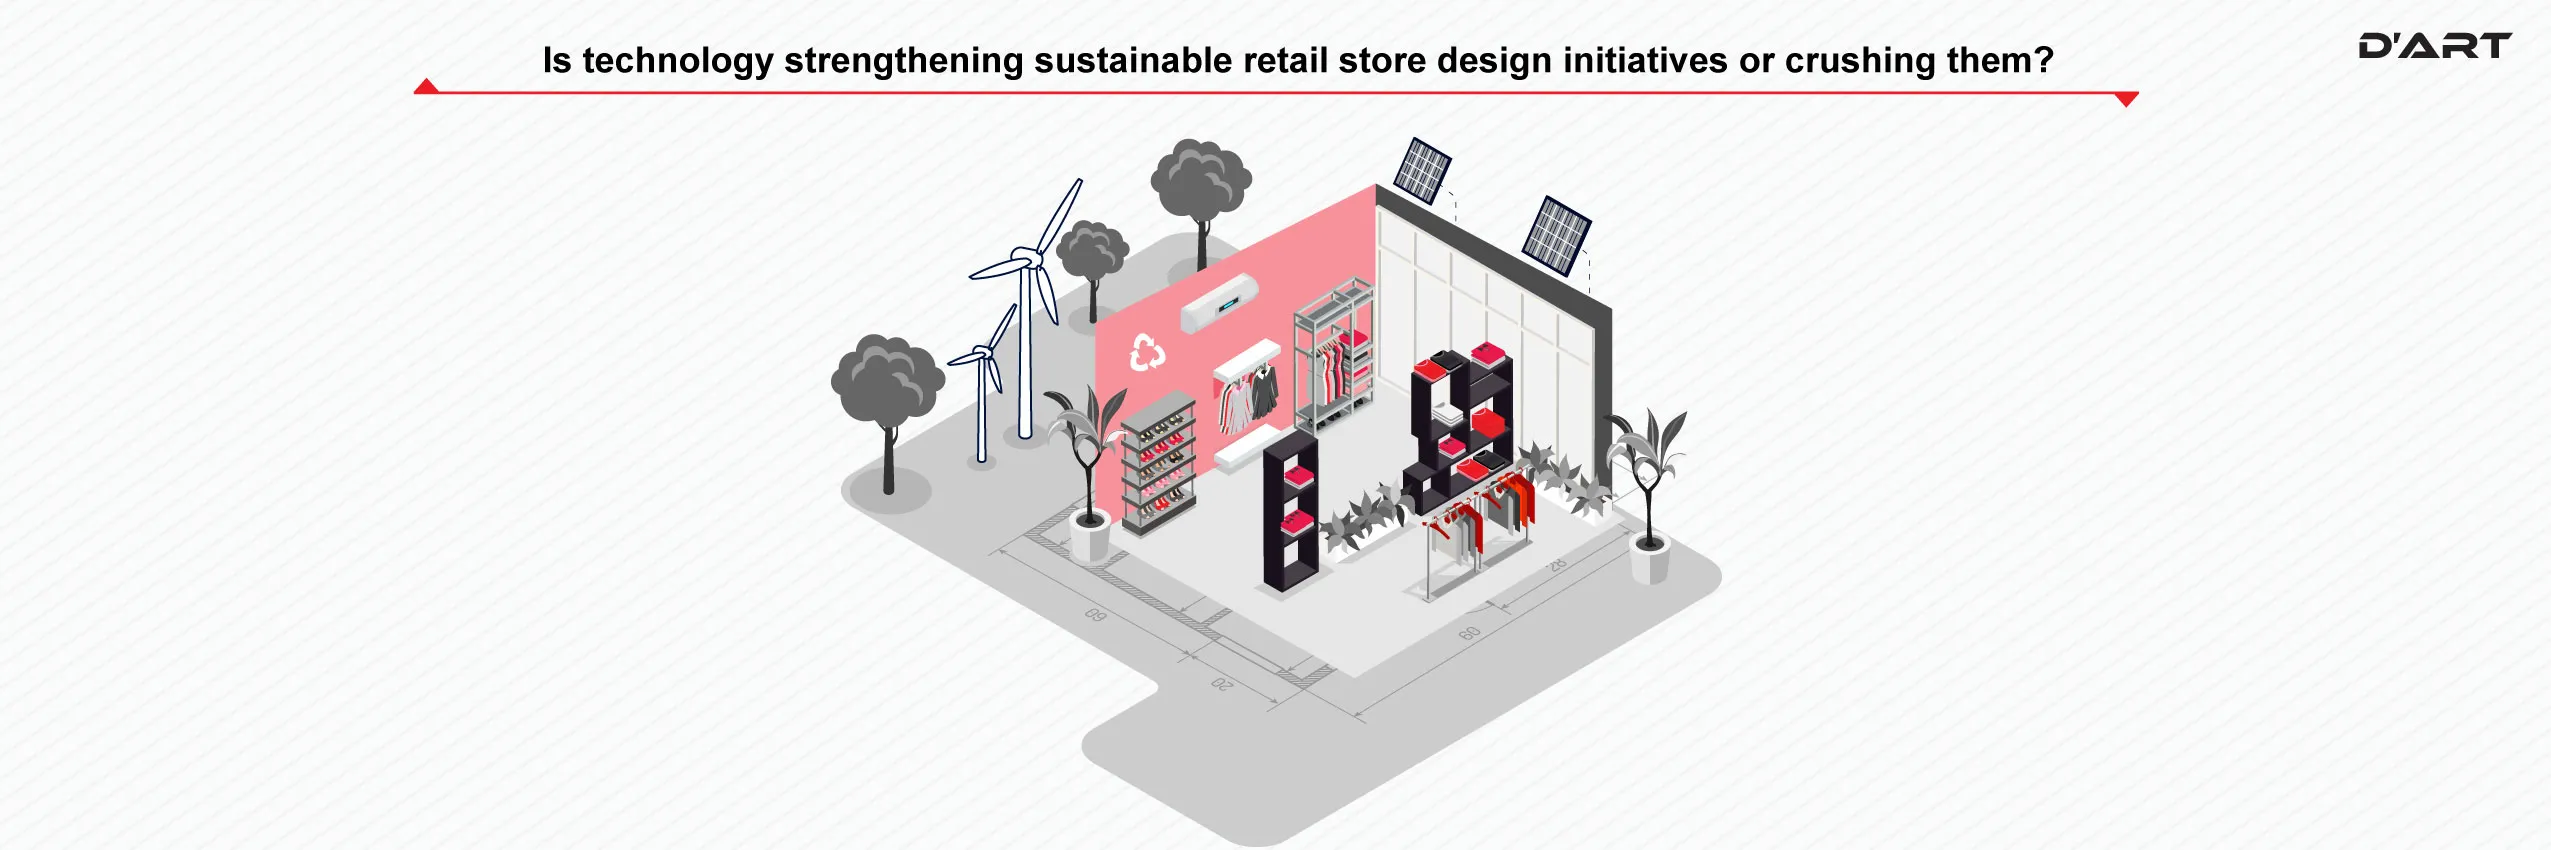 Is technology strengthening sustainable retail store design initiatives or crushing them?